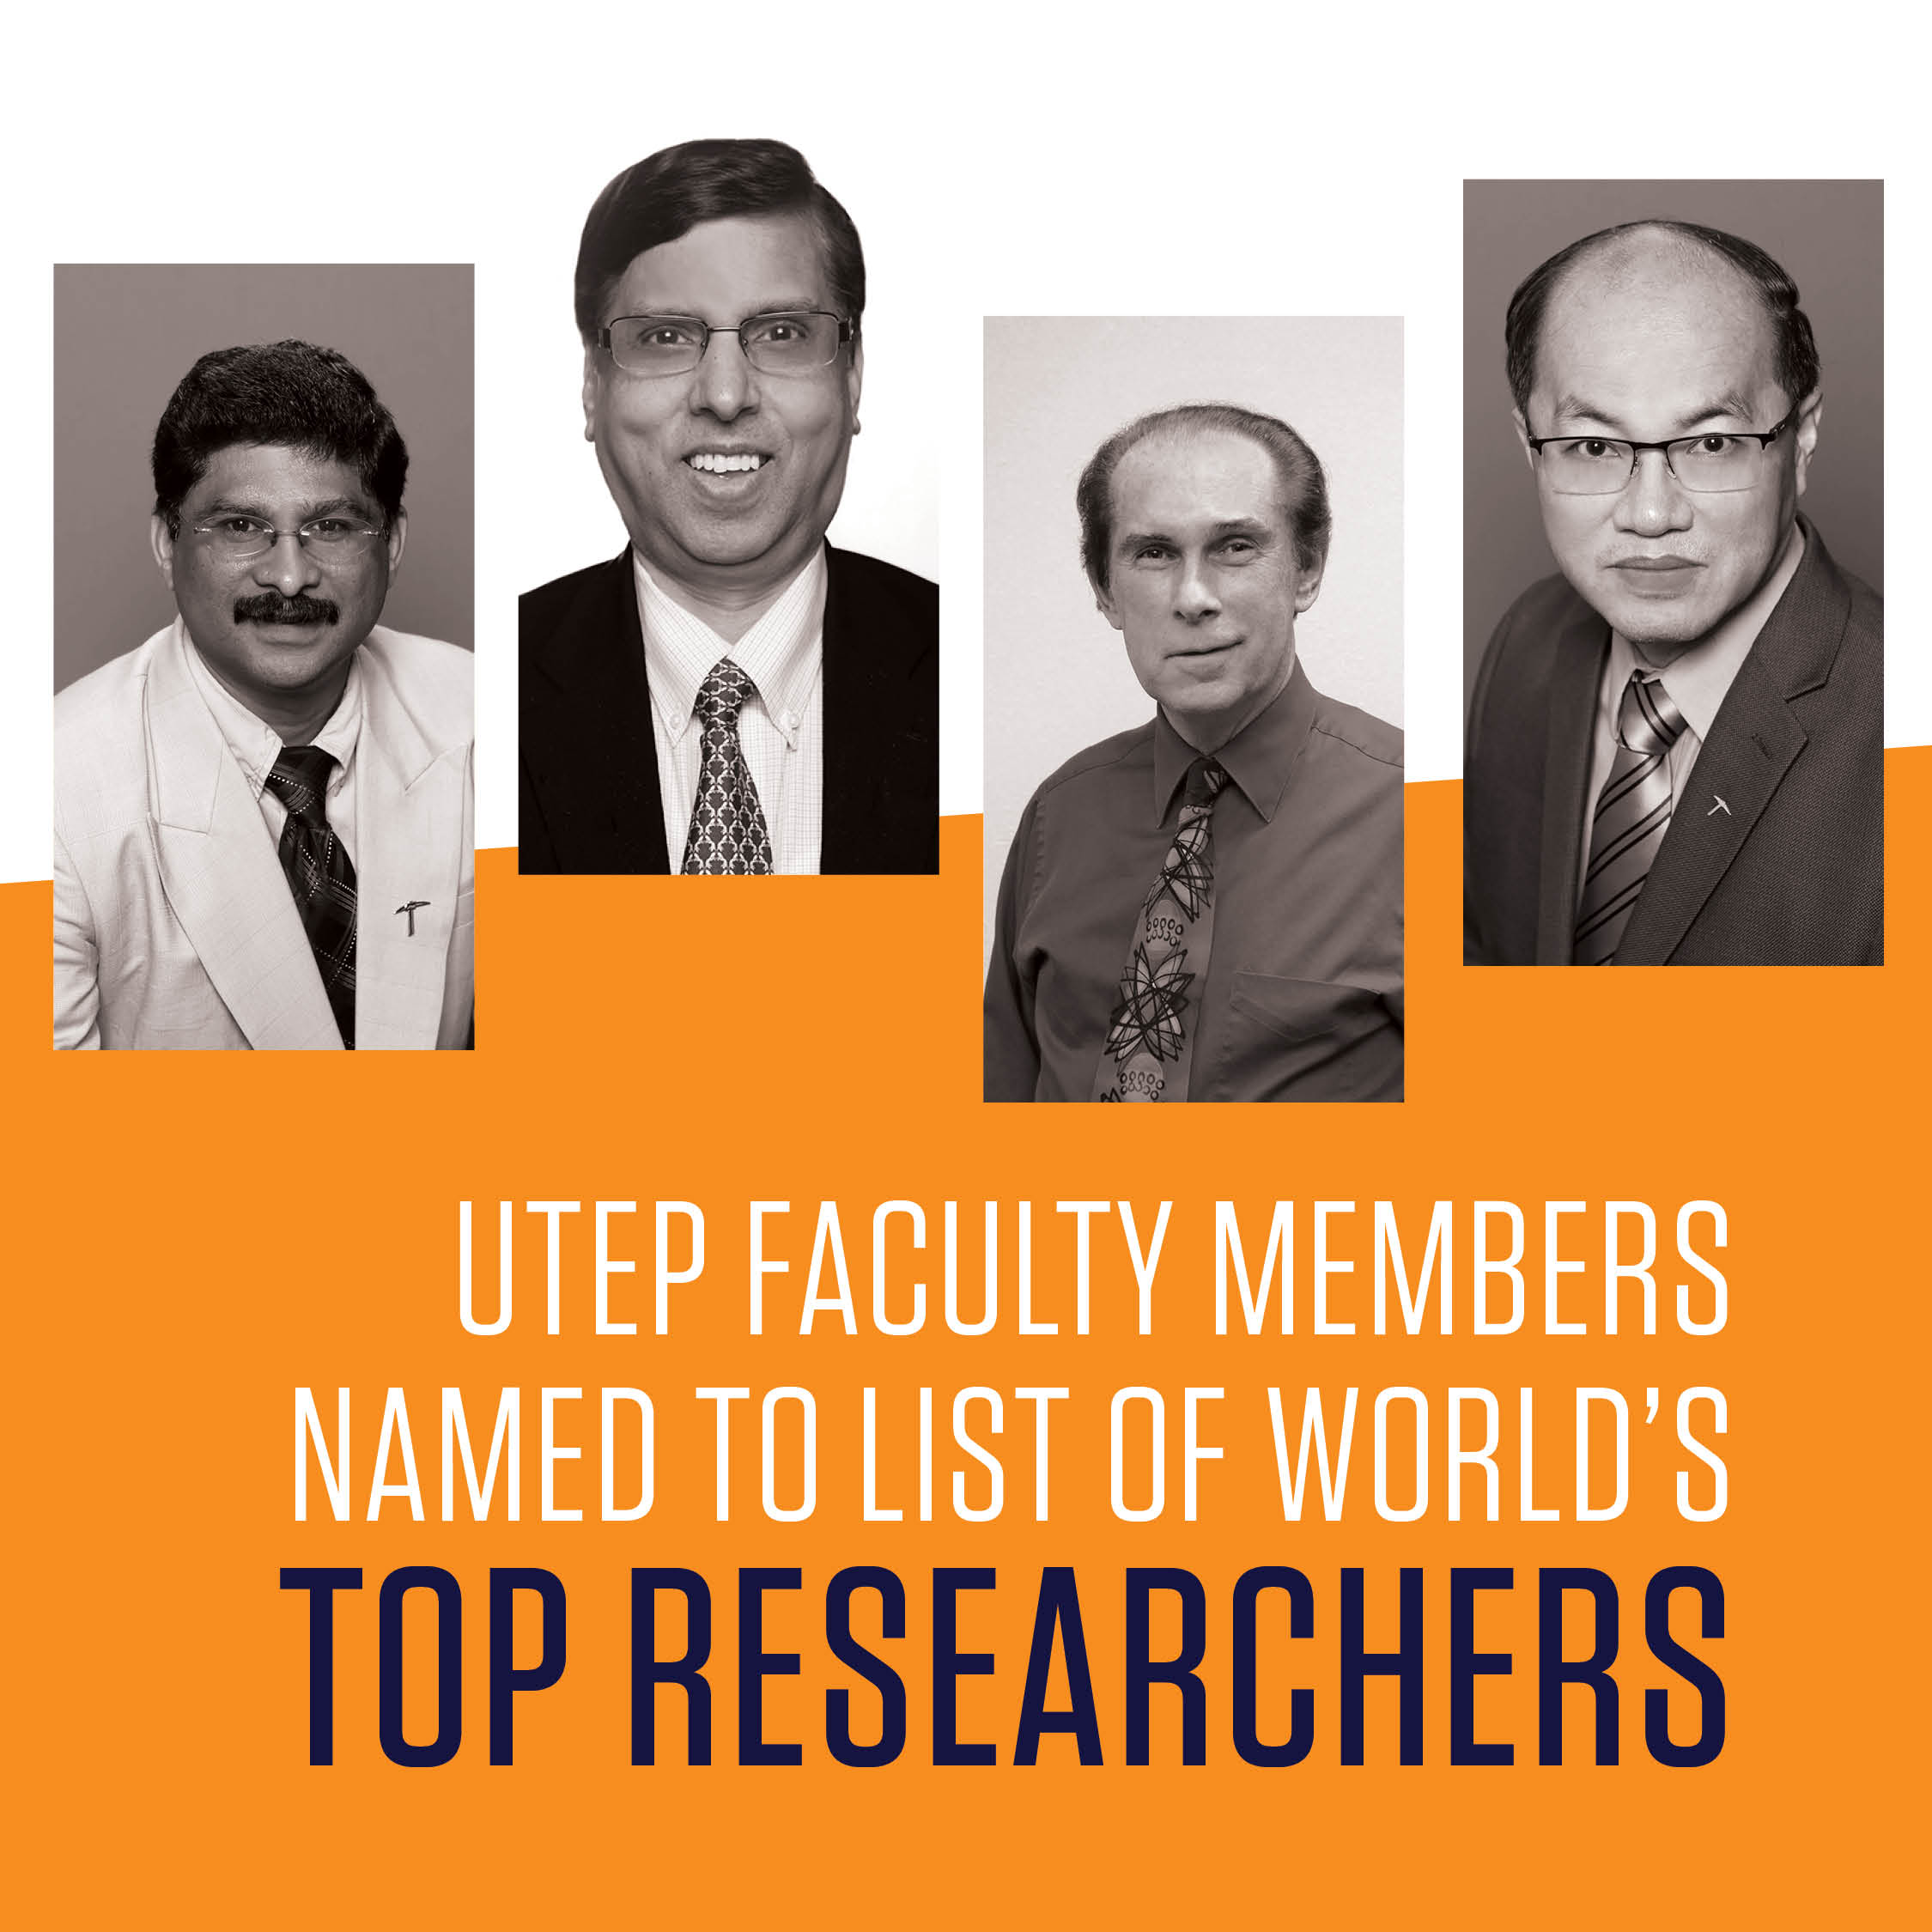 UTEP Faculty Members Named to List of Worlds Top Researchers